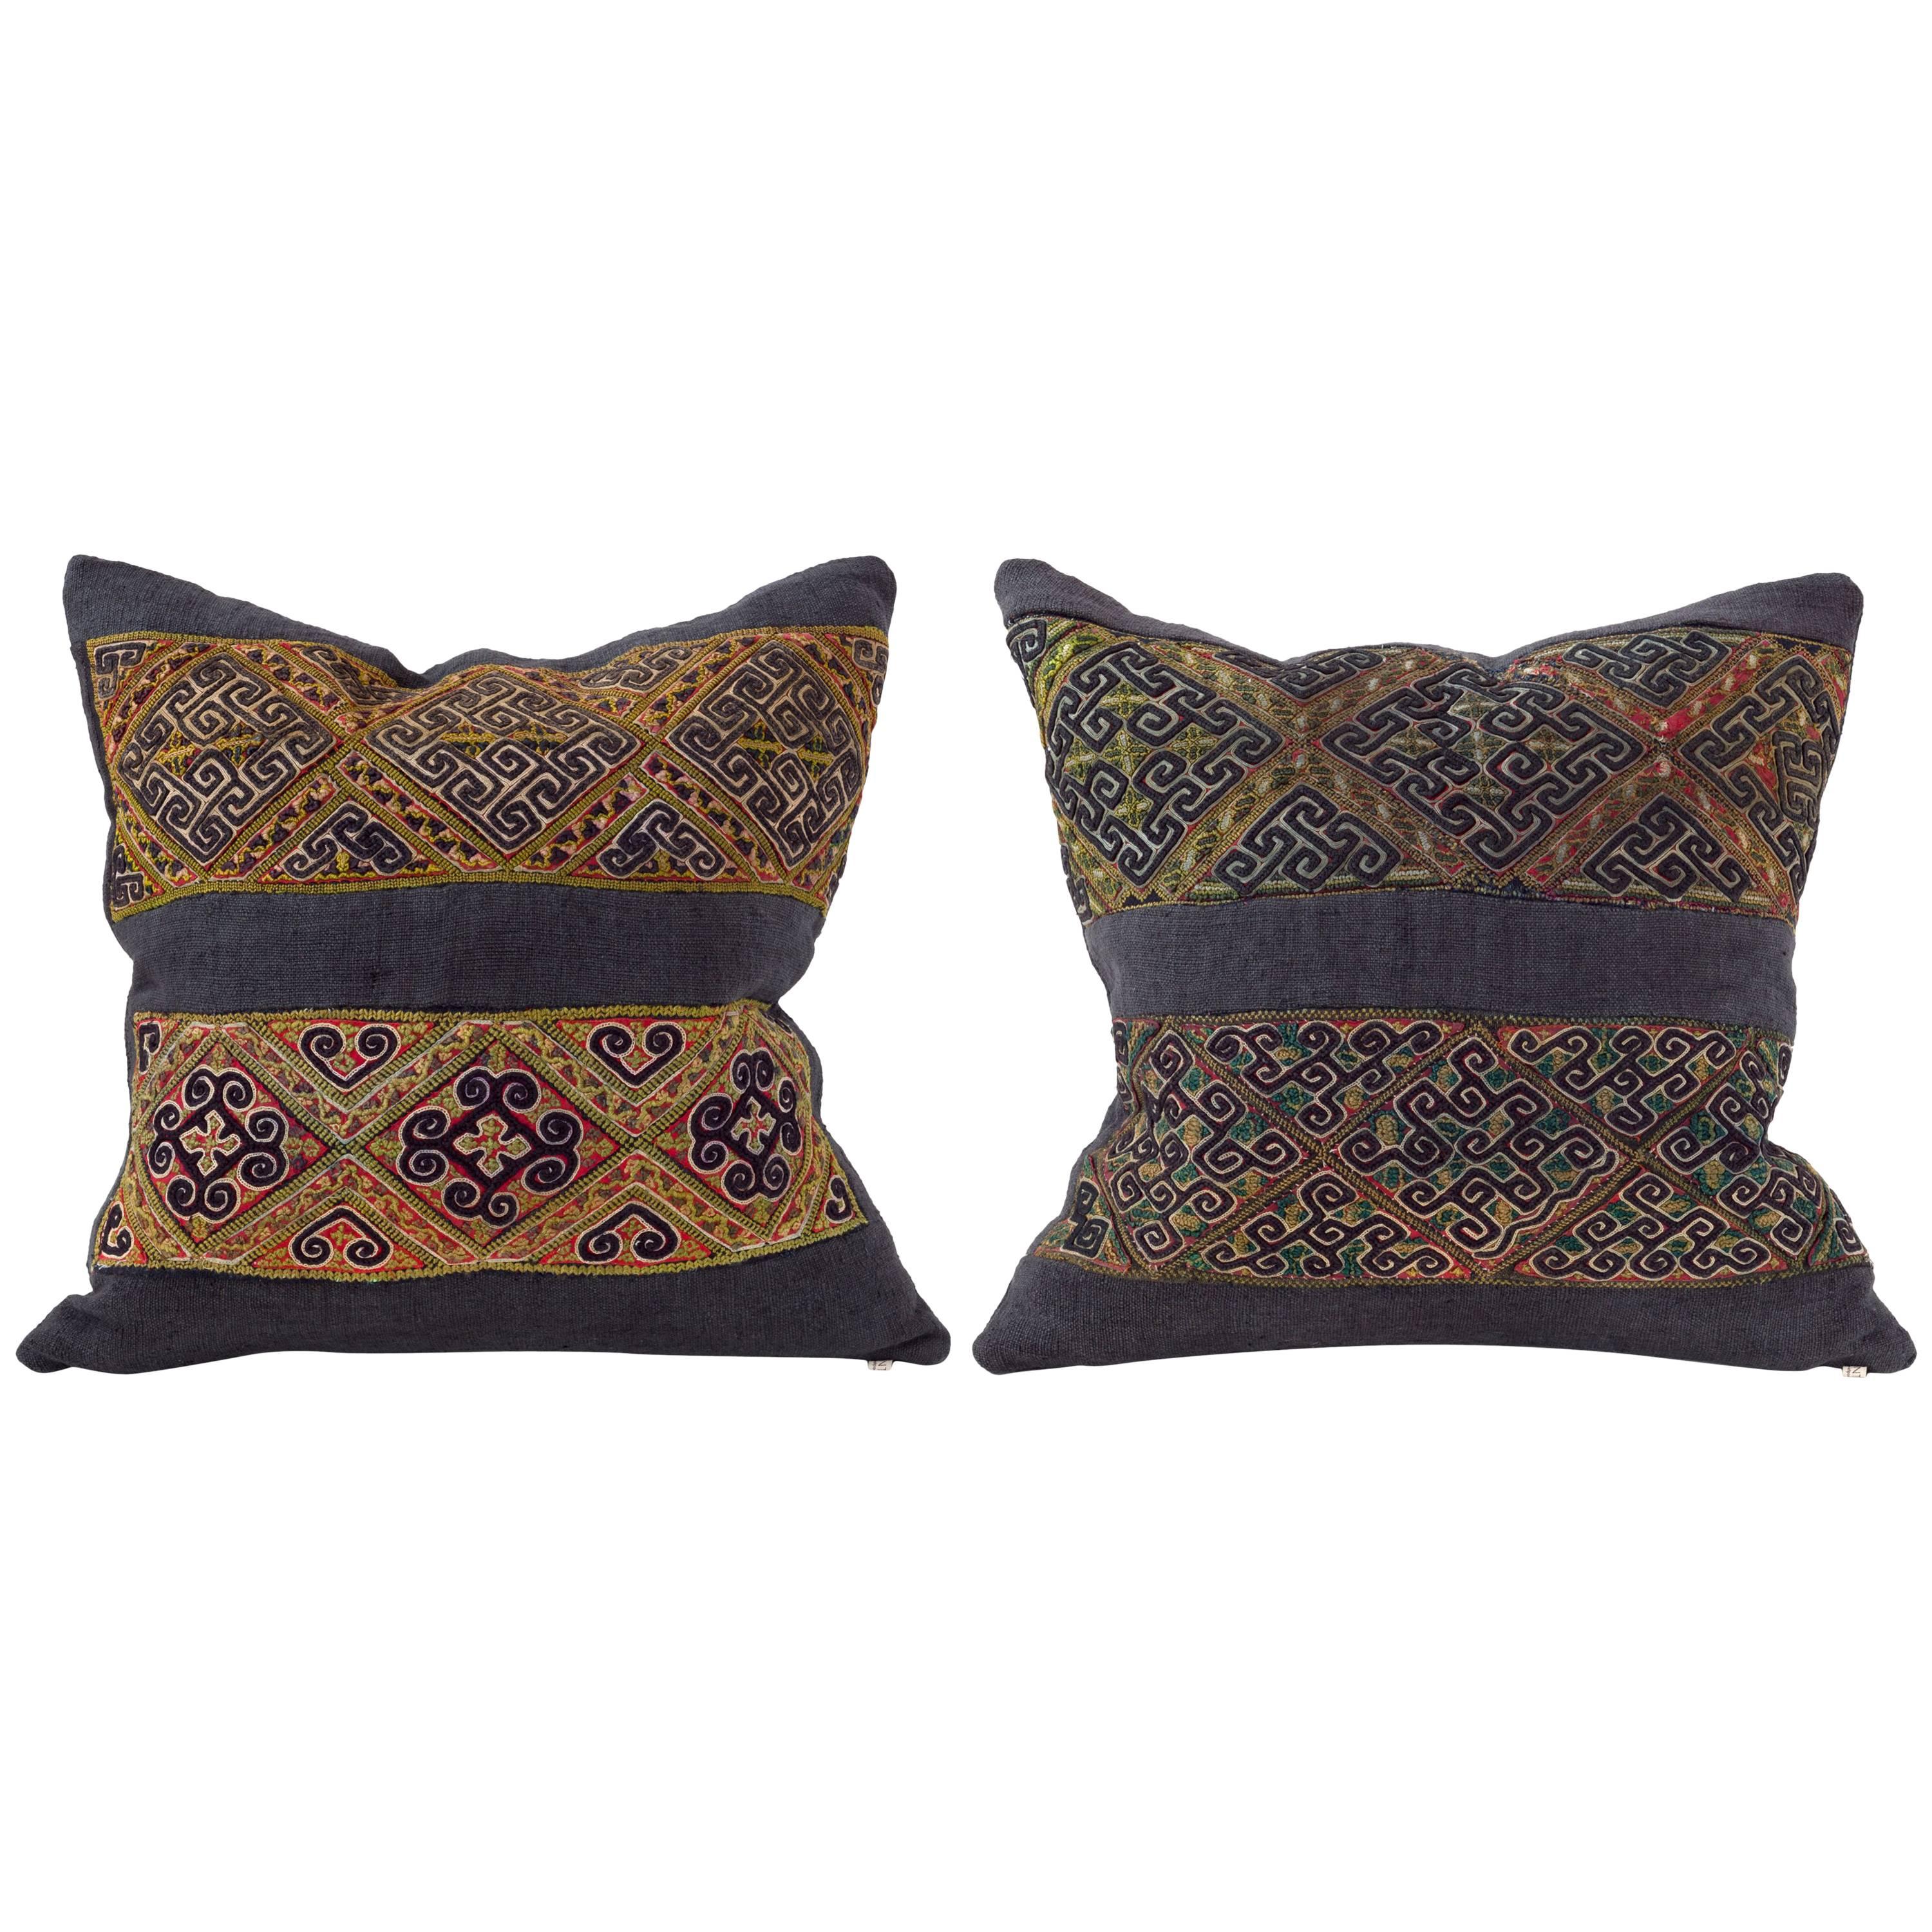 Vintage Embroidery Pillows, Indigo Green Red, Mustard For Sale